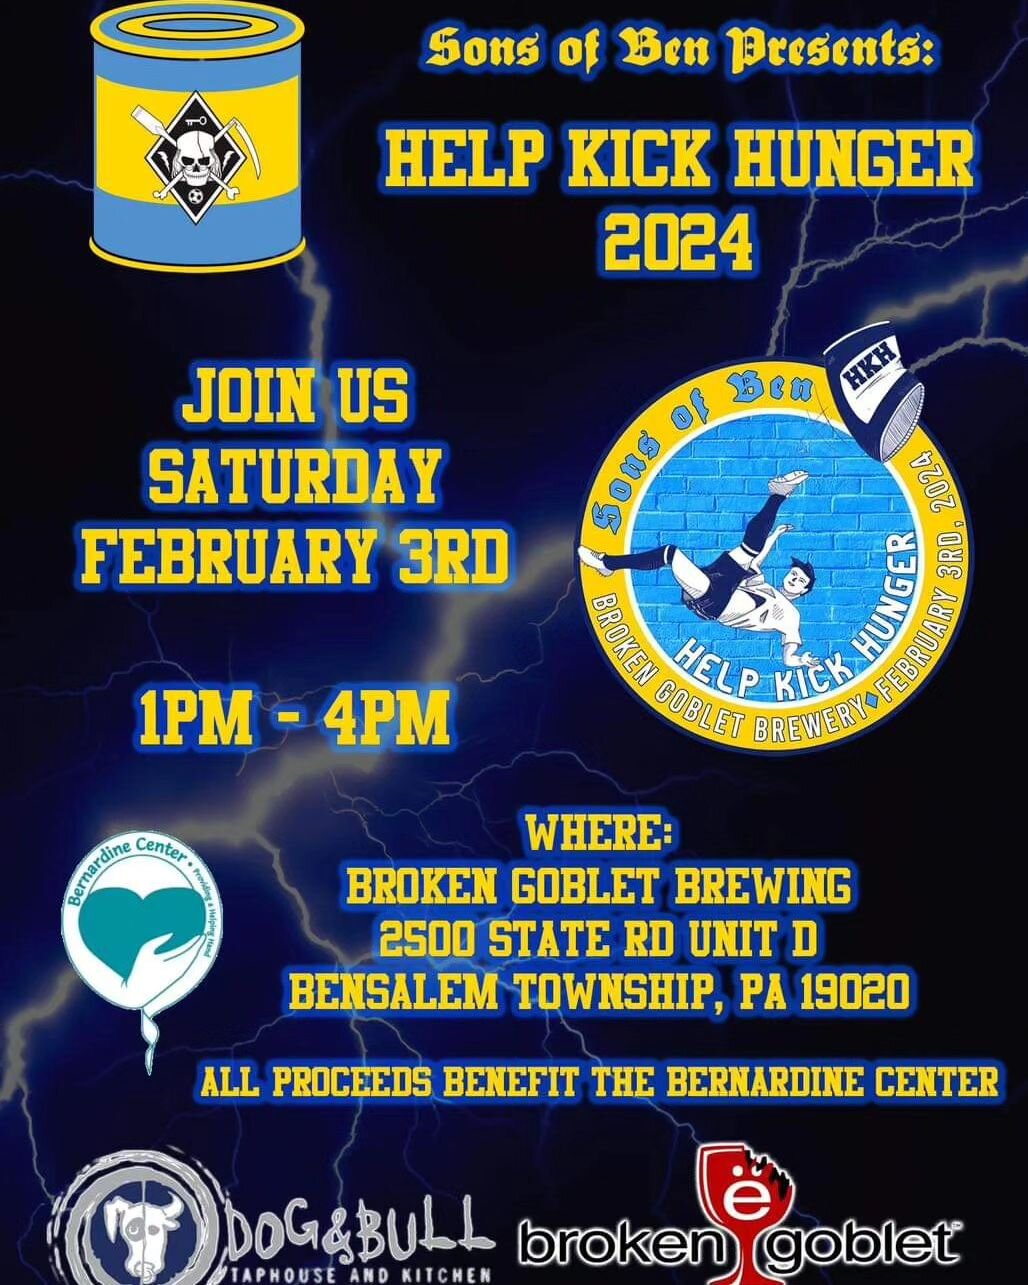 Join the Sons of Ben on Saturday, February 3rd, at Broken Goblet Brewing in Bensalem, PA, for Help Kick Hunger 2024. Enjoy an afternoon of friends, fun, food, and prizes, all benefiting The Bernardine Center in Chester, Pennsylvania.

Ticket includes